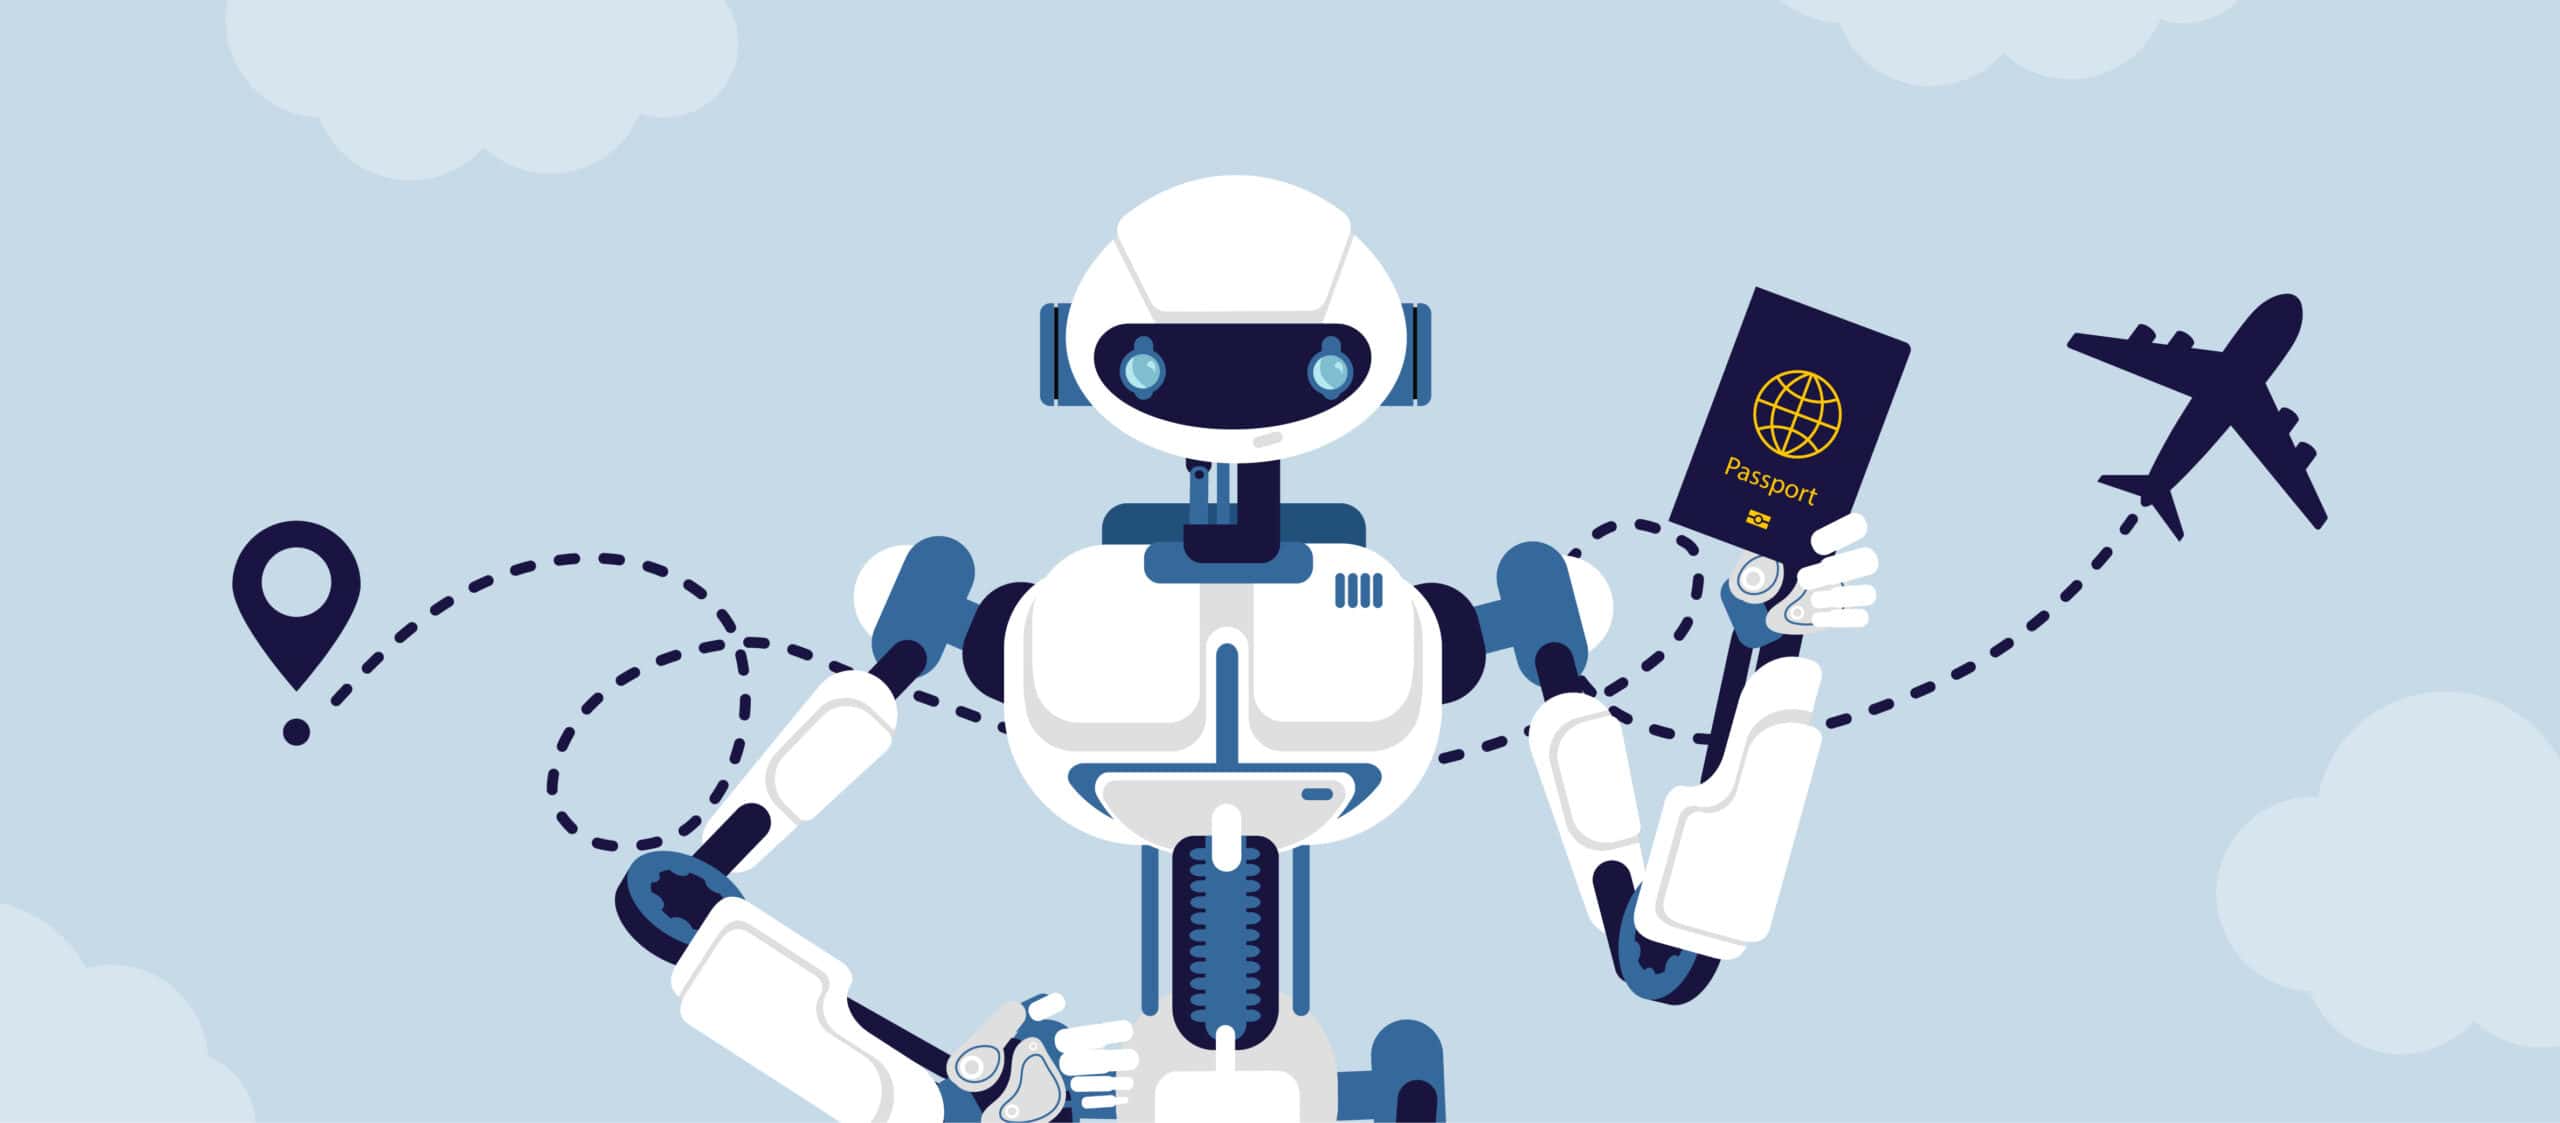 An illustration of AbleBot holds up a passport. Behind it is a plane leaving a destination marker.